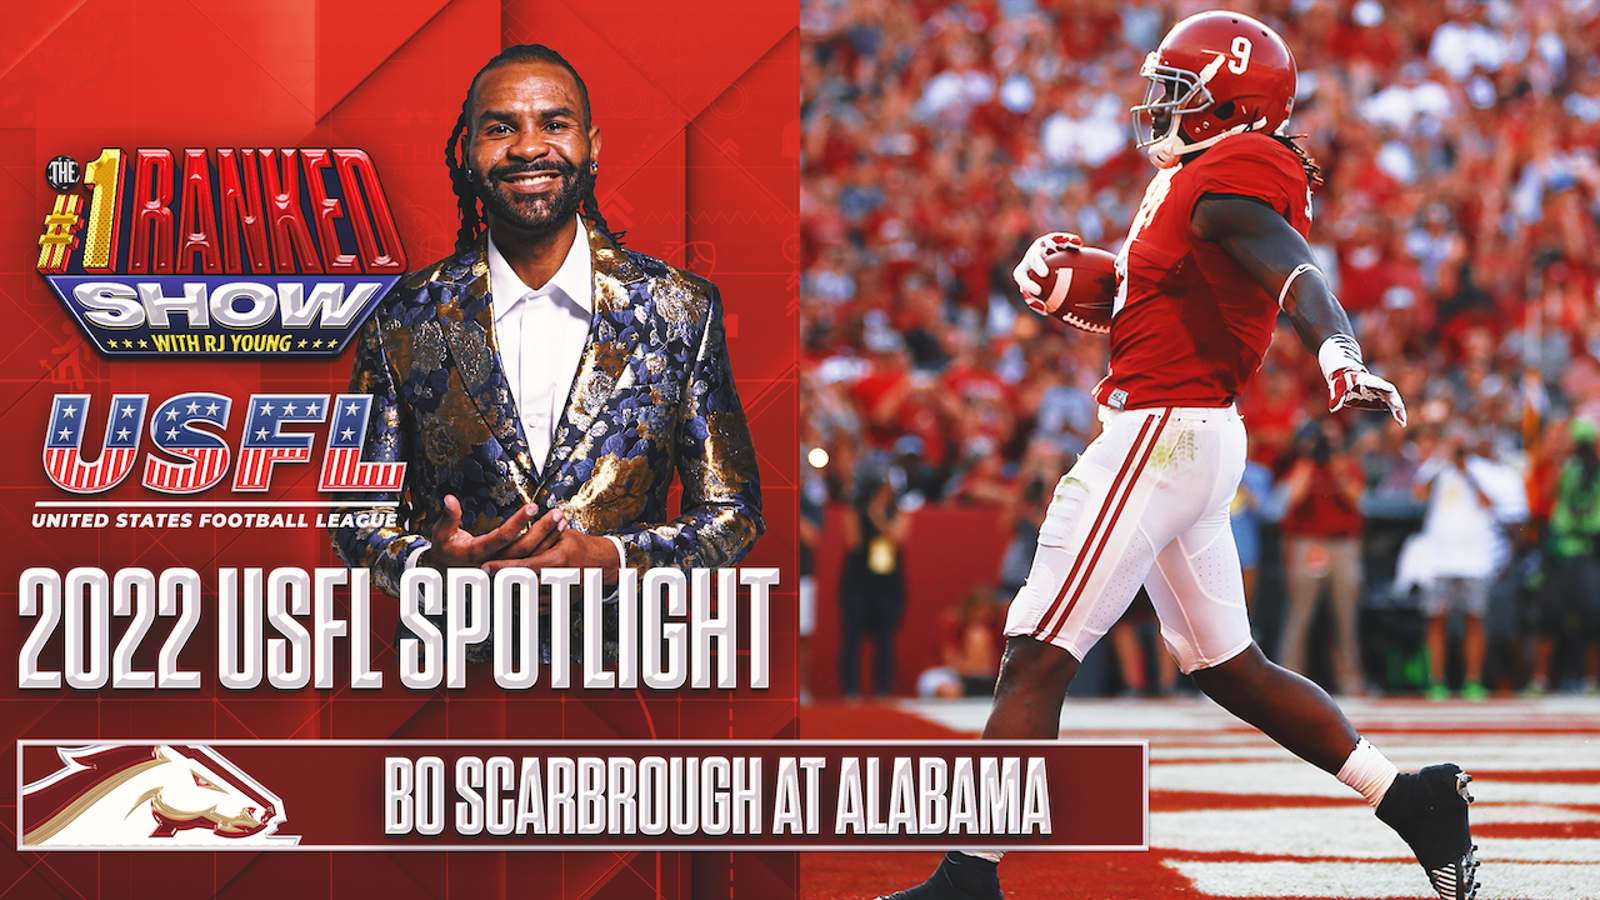 Bo Scarbrough on what he learned from Nick Saban